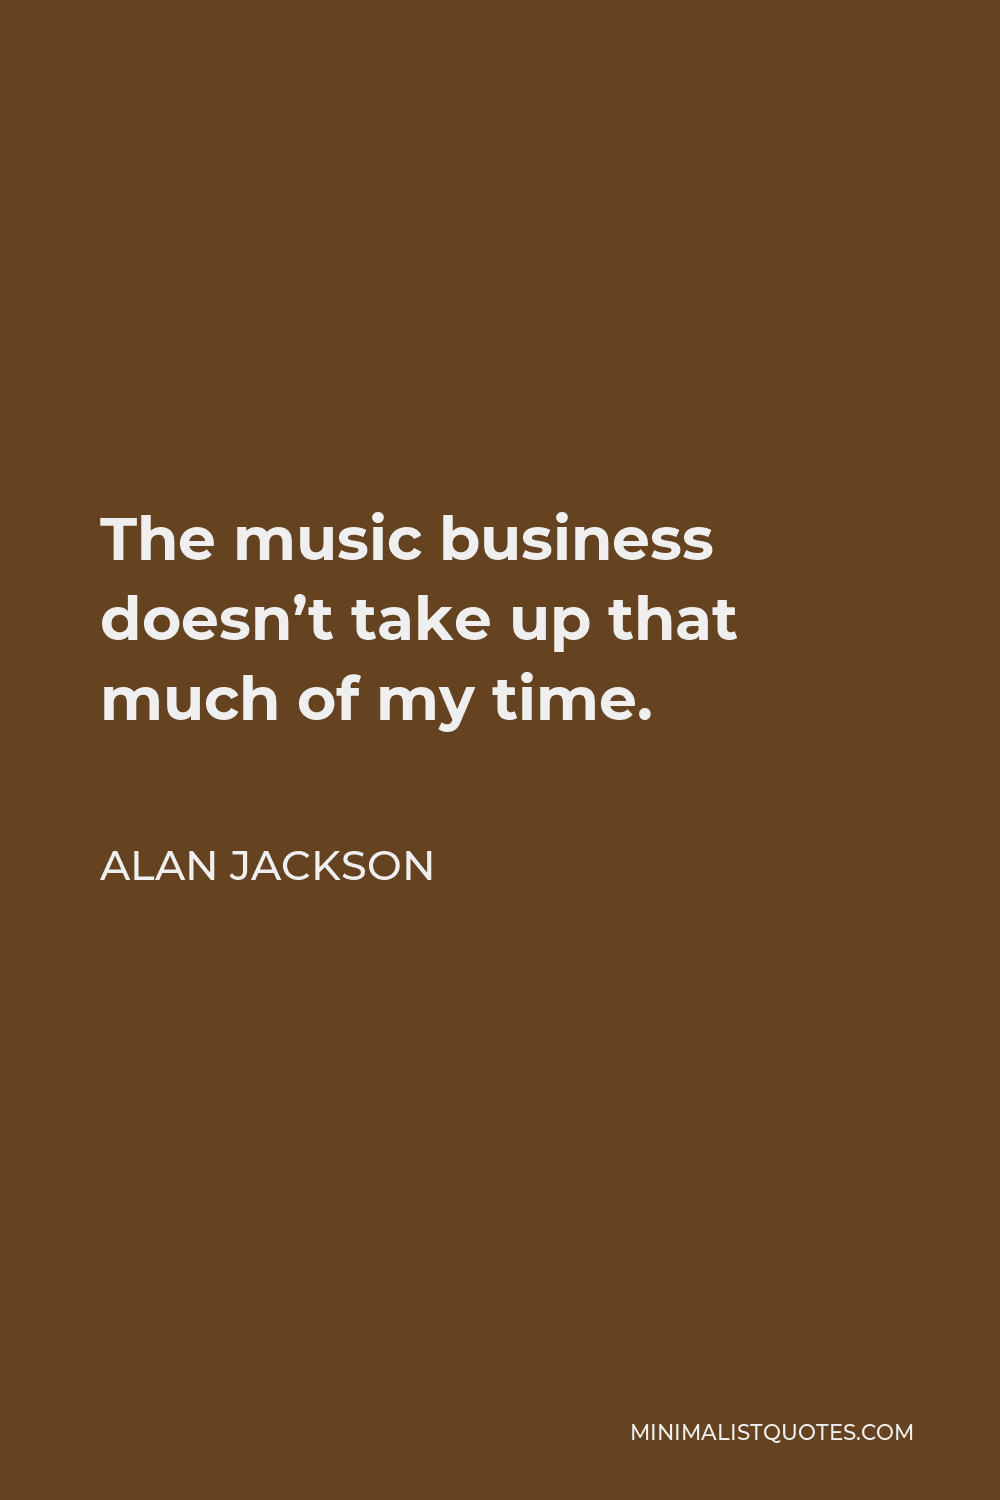 Alan Jackson Quote - The music business doesn’t take up that much of my time.